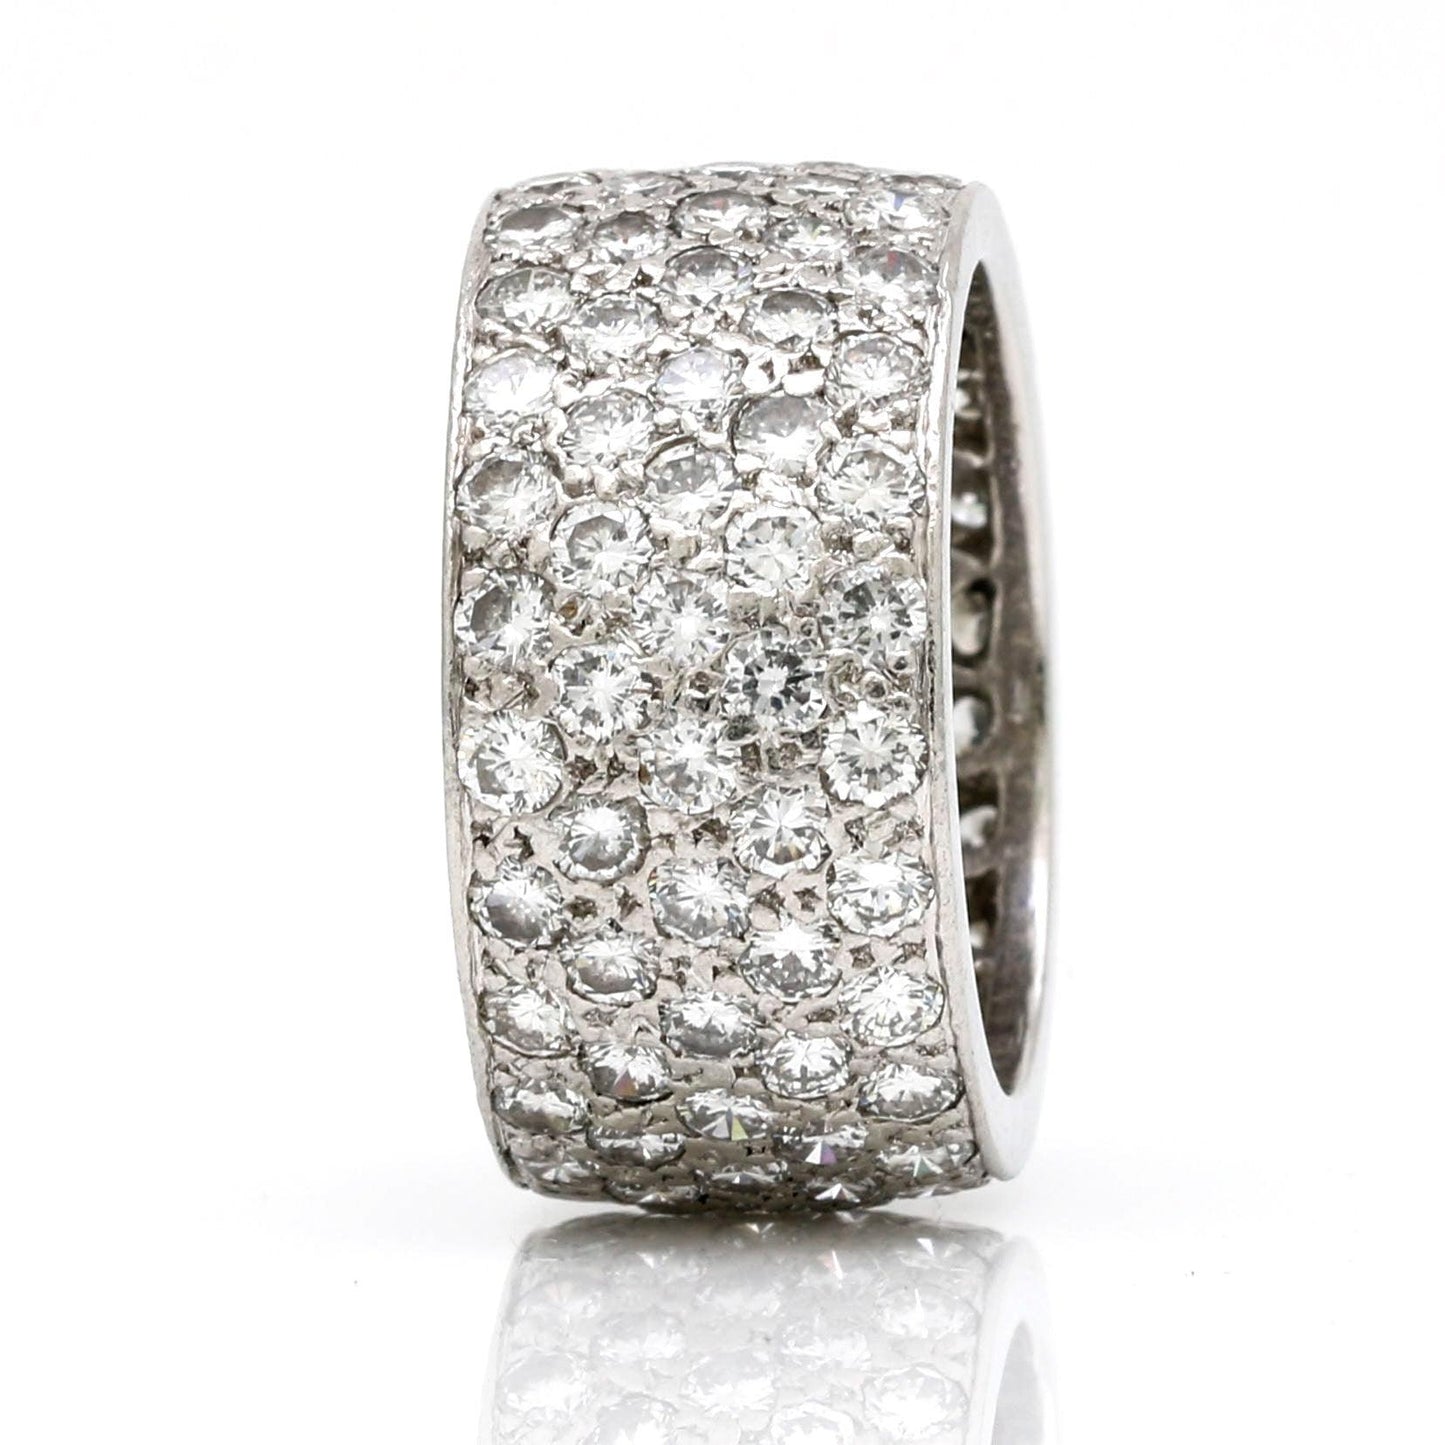 Women's Pave Diamond Wide Band Ring in Platinum 5.00 cttw - 31 Jewels Inc.